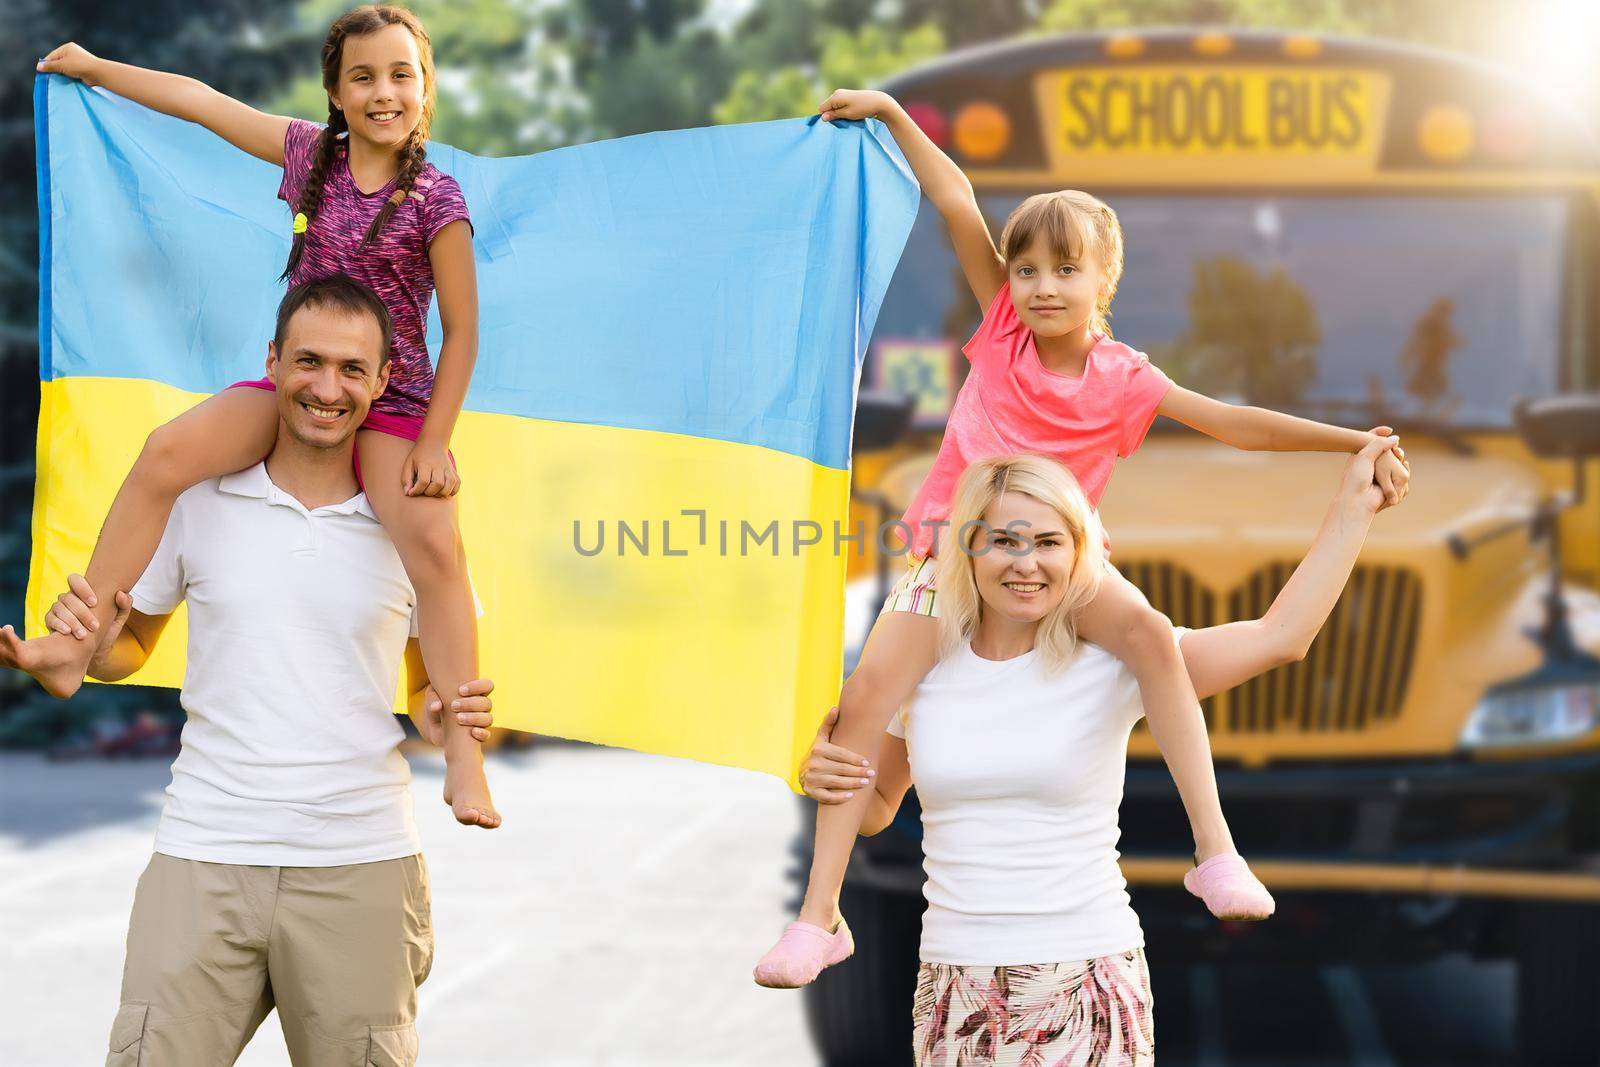 family near the school bus with the flag of Ukraine.